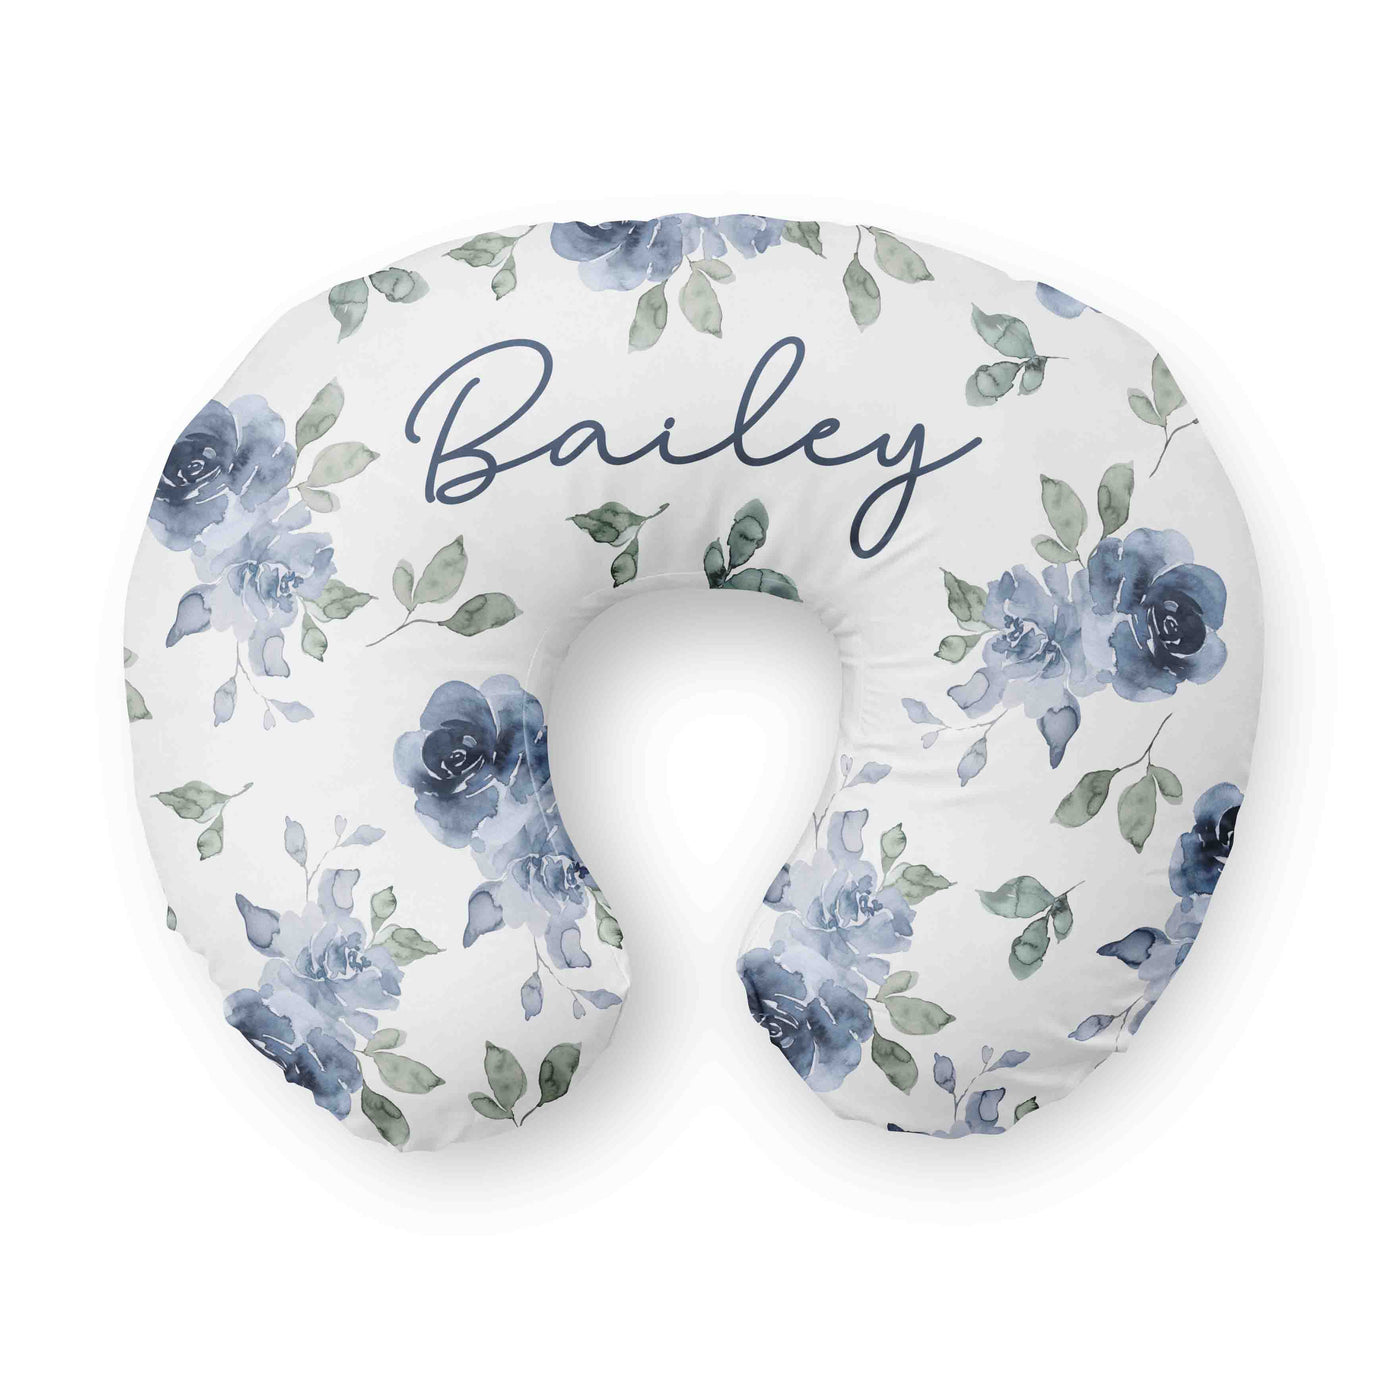 bailey's blue floral personalized nursing pillow cover